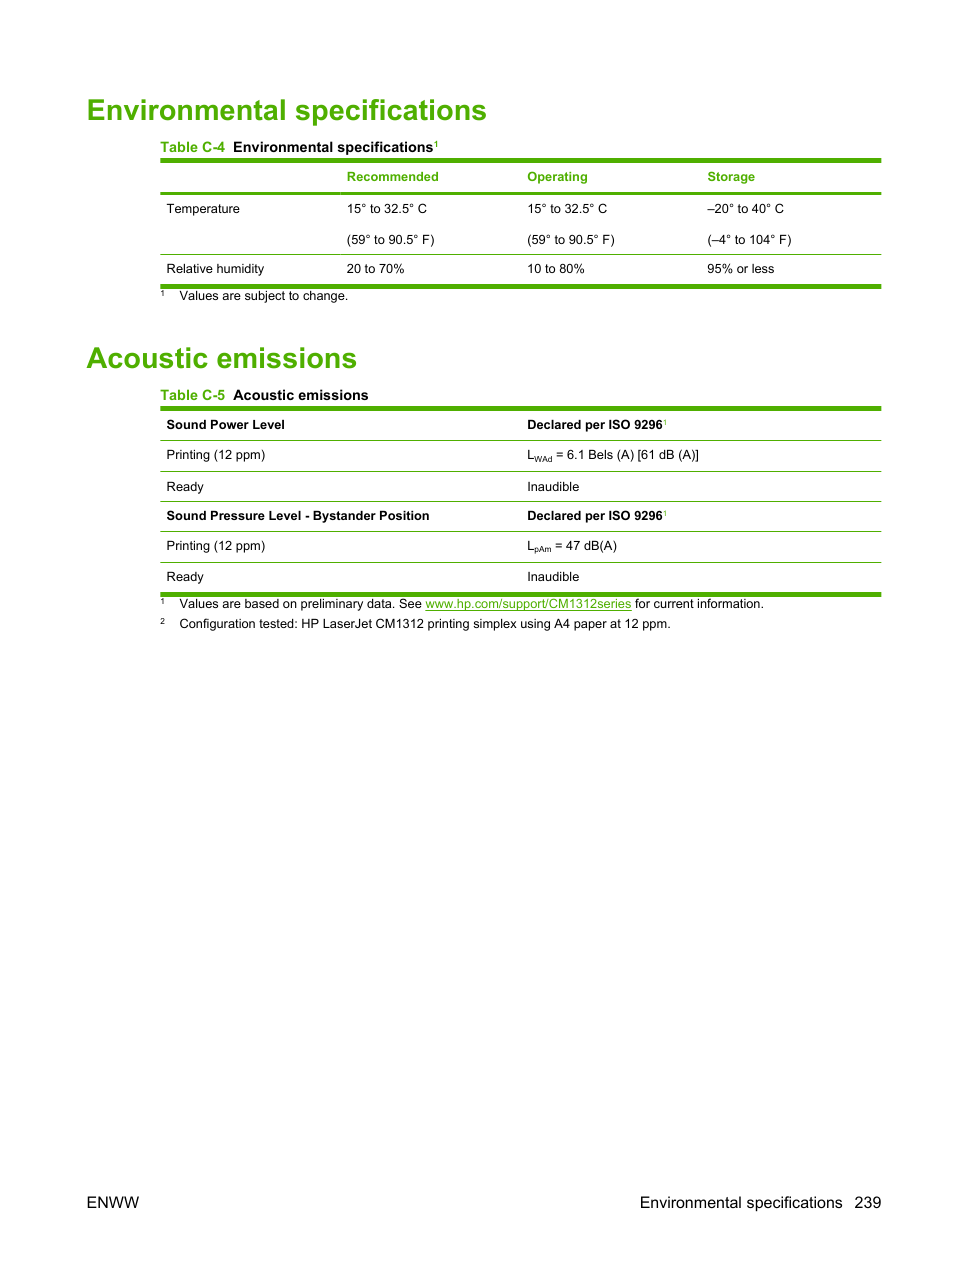 Environmental specifications, Acoustic emissions, Enww environmental specifications 239 | HP CM1312 MFP Series User Manual | Page 251 / 276